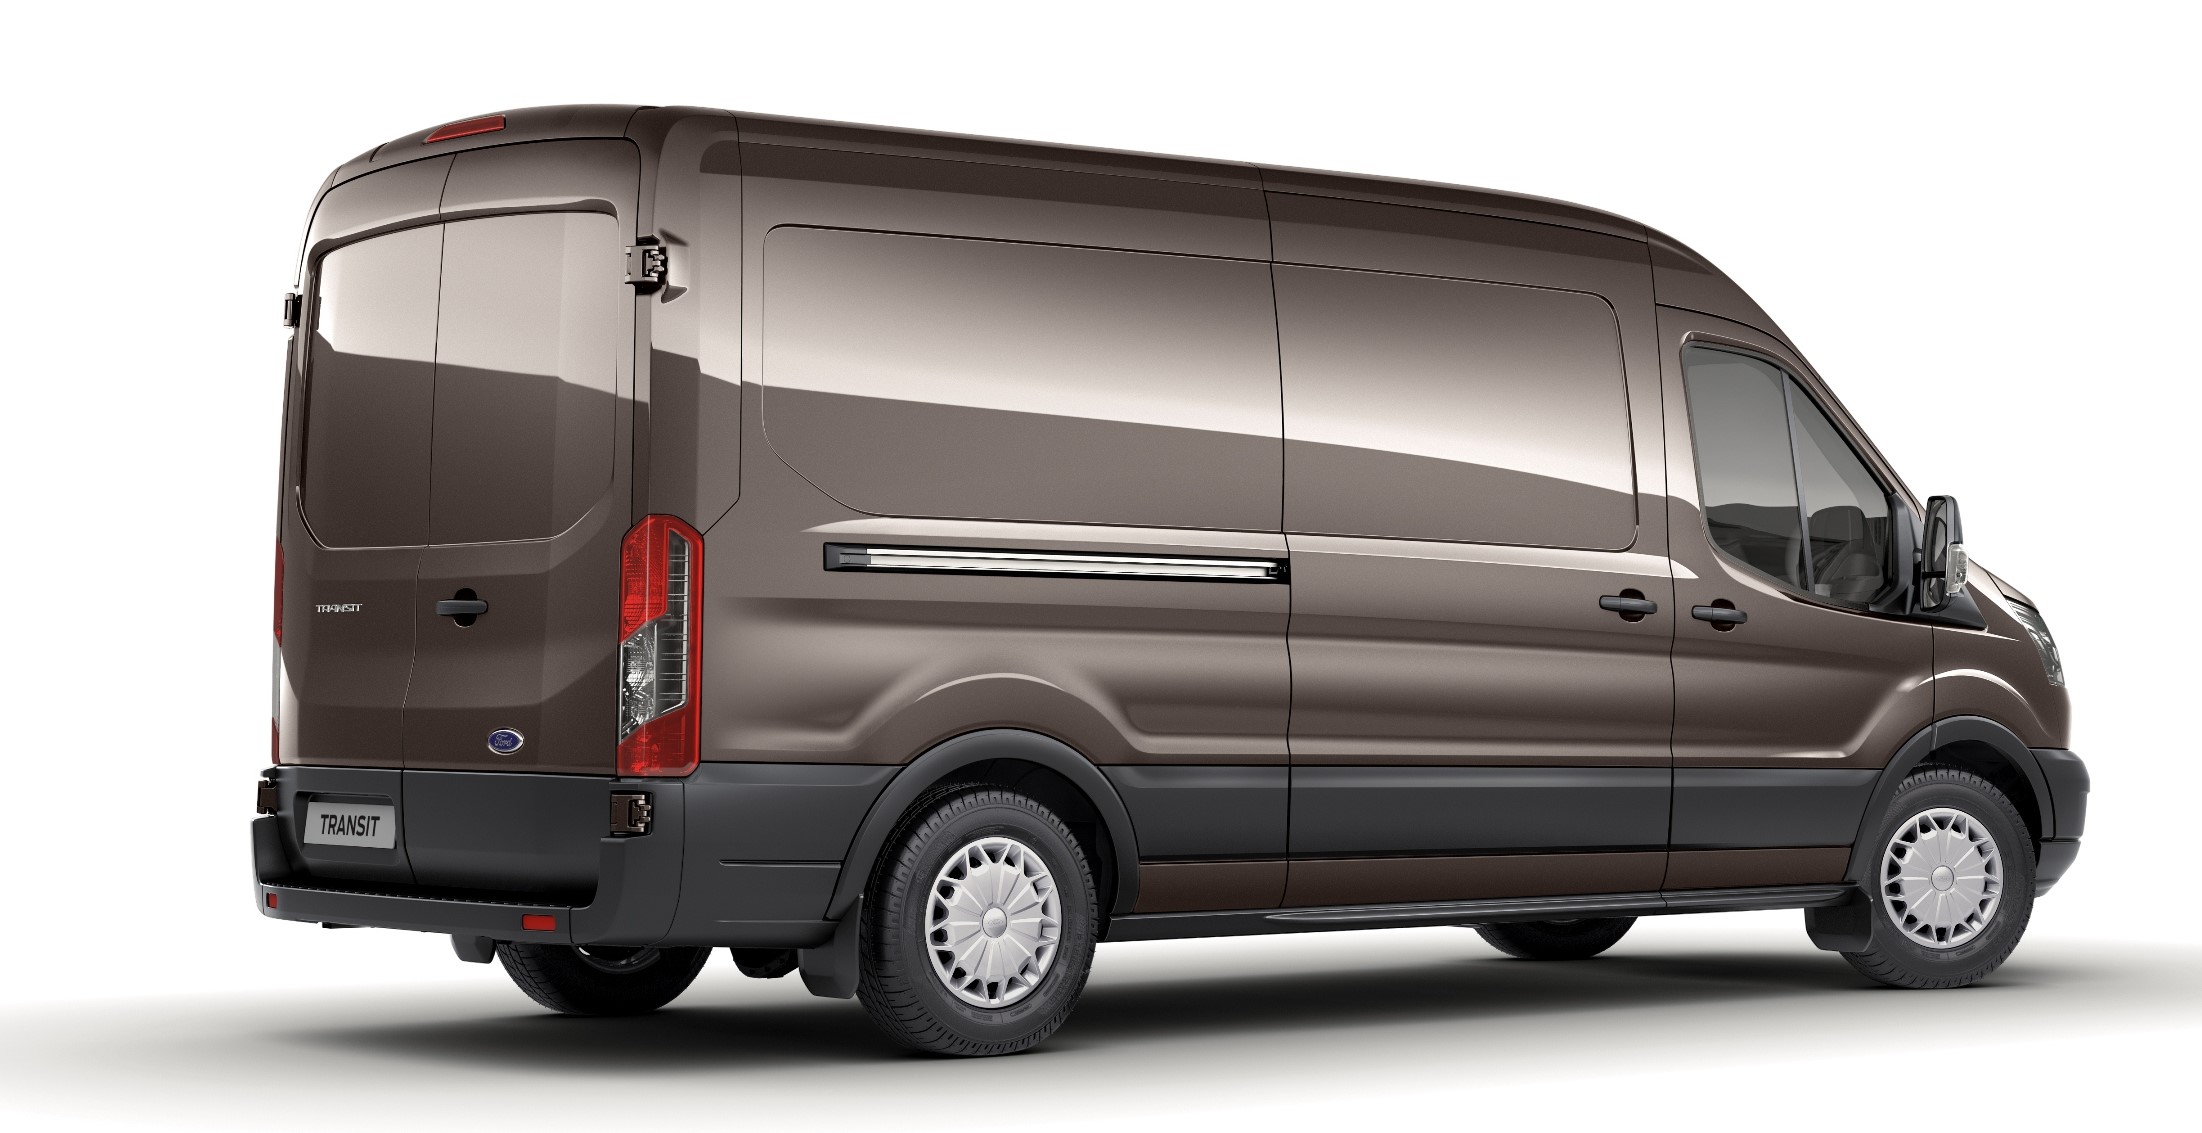 Ford Transit 2014 - CommercialVehicle.com